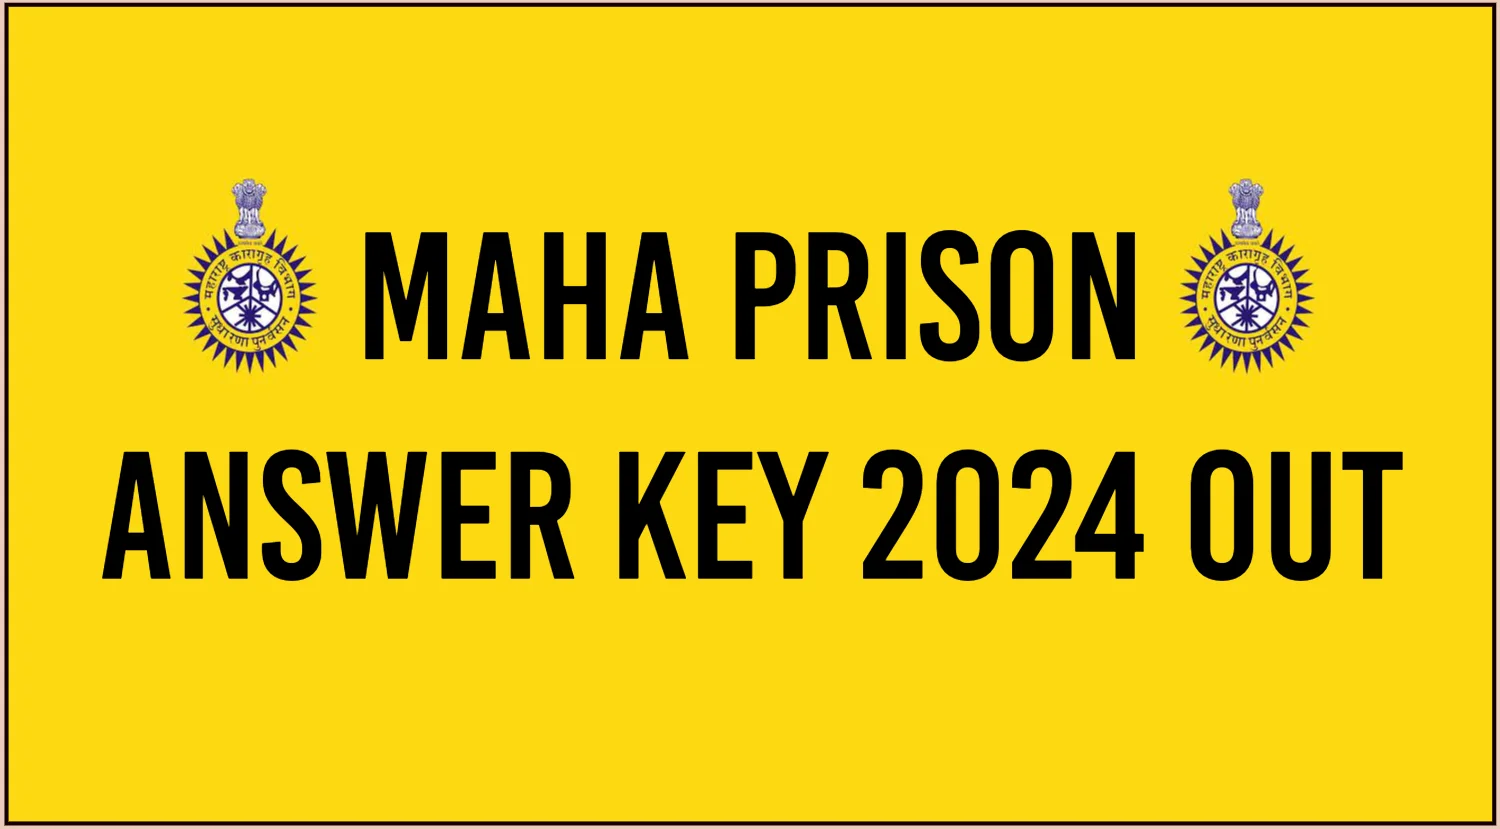 Maha Prison Answer Key 2024 Out, Download Maharashtra Prison Answer Key from mahaprisons.gov.in